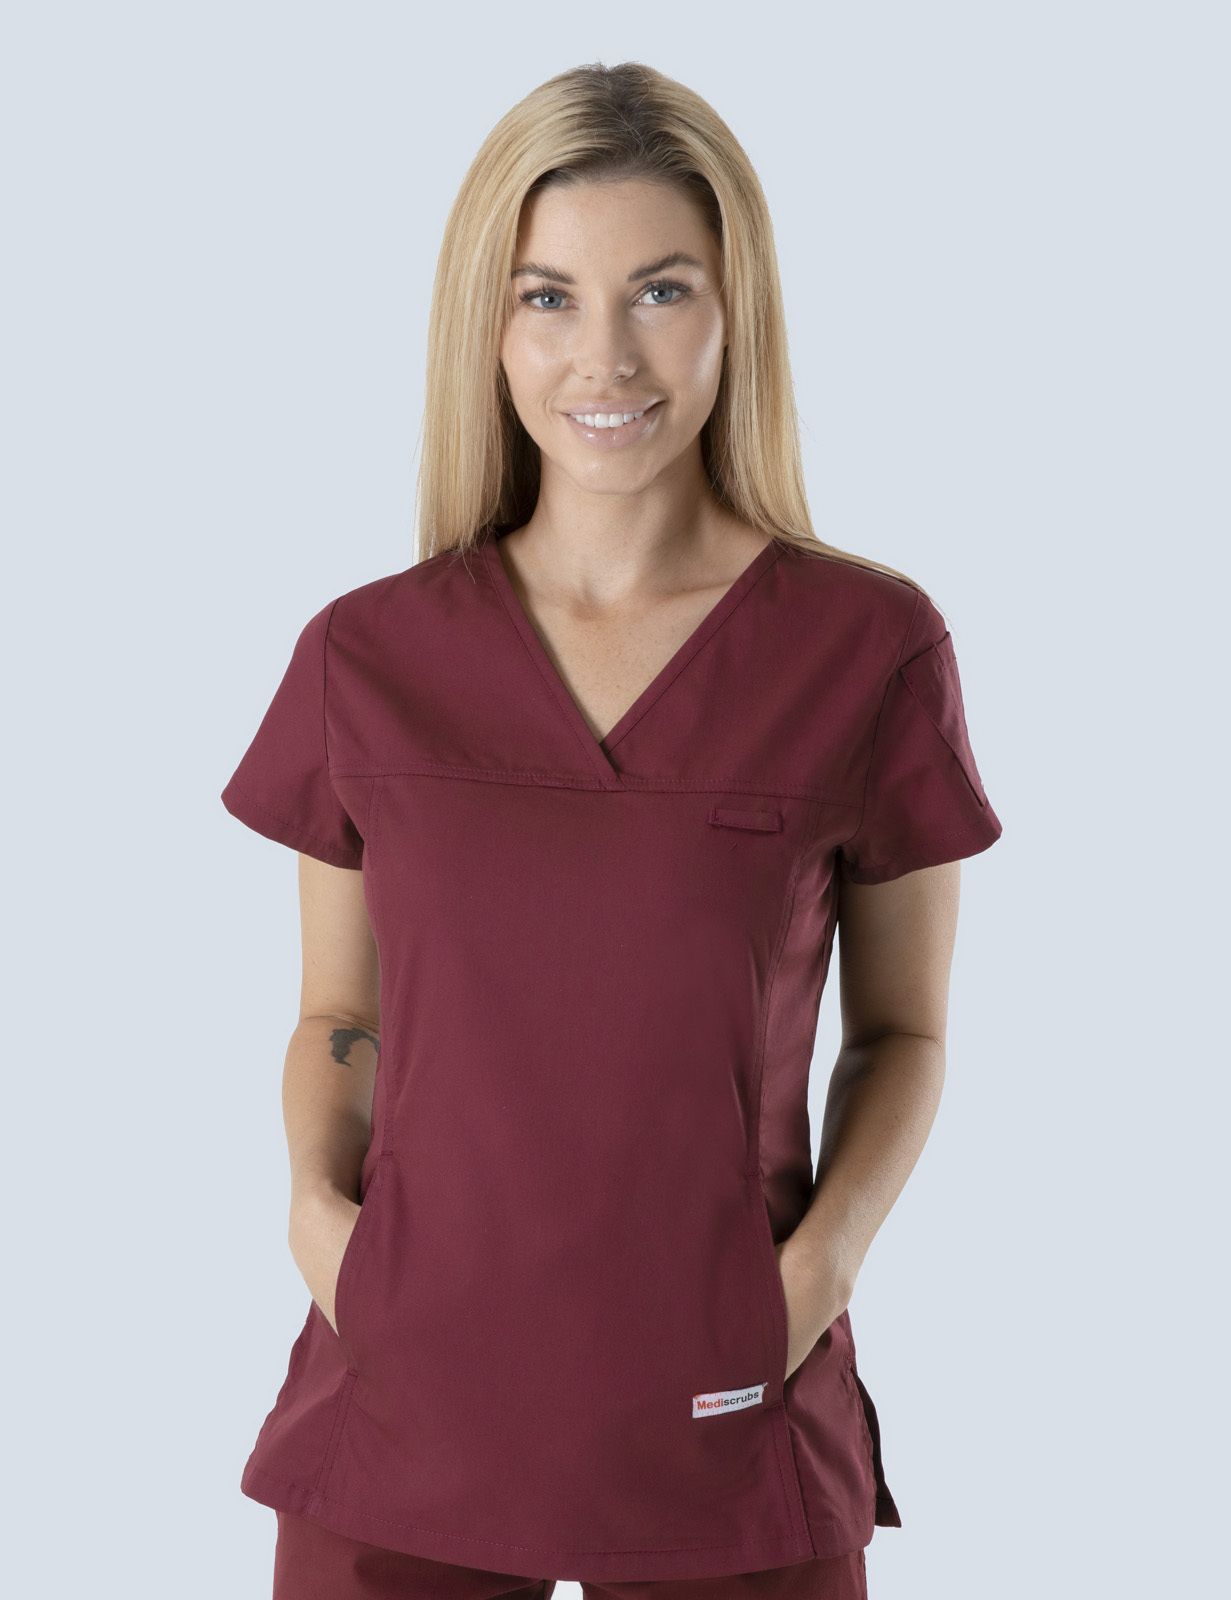 Caloundra Hospital - Nursing Practitioner (Women's Fit Solid Scrub Top and Cargo Pants in Burgundy incl Logos)